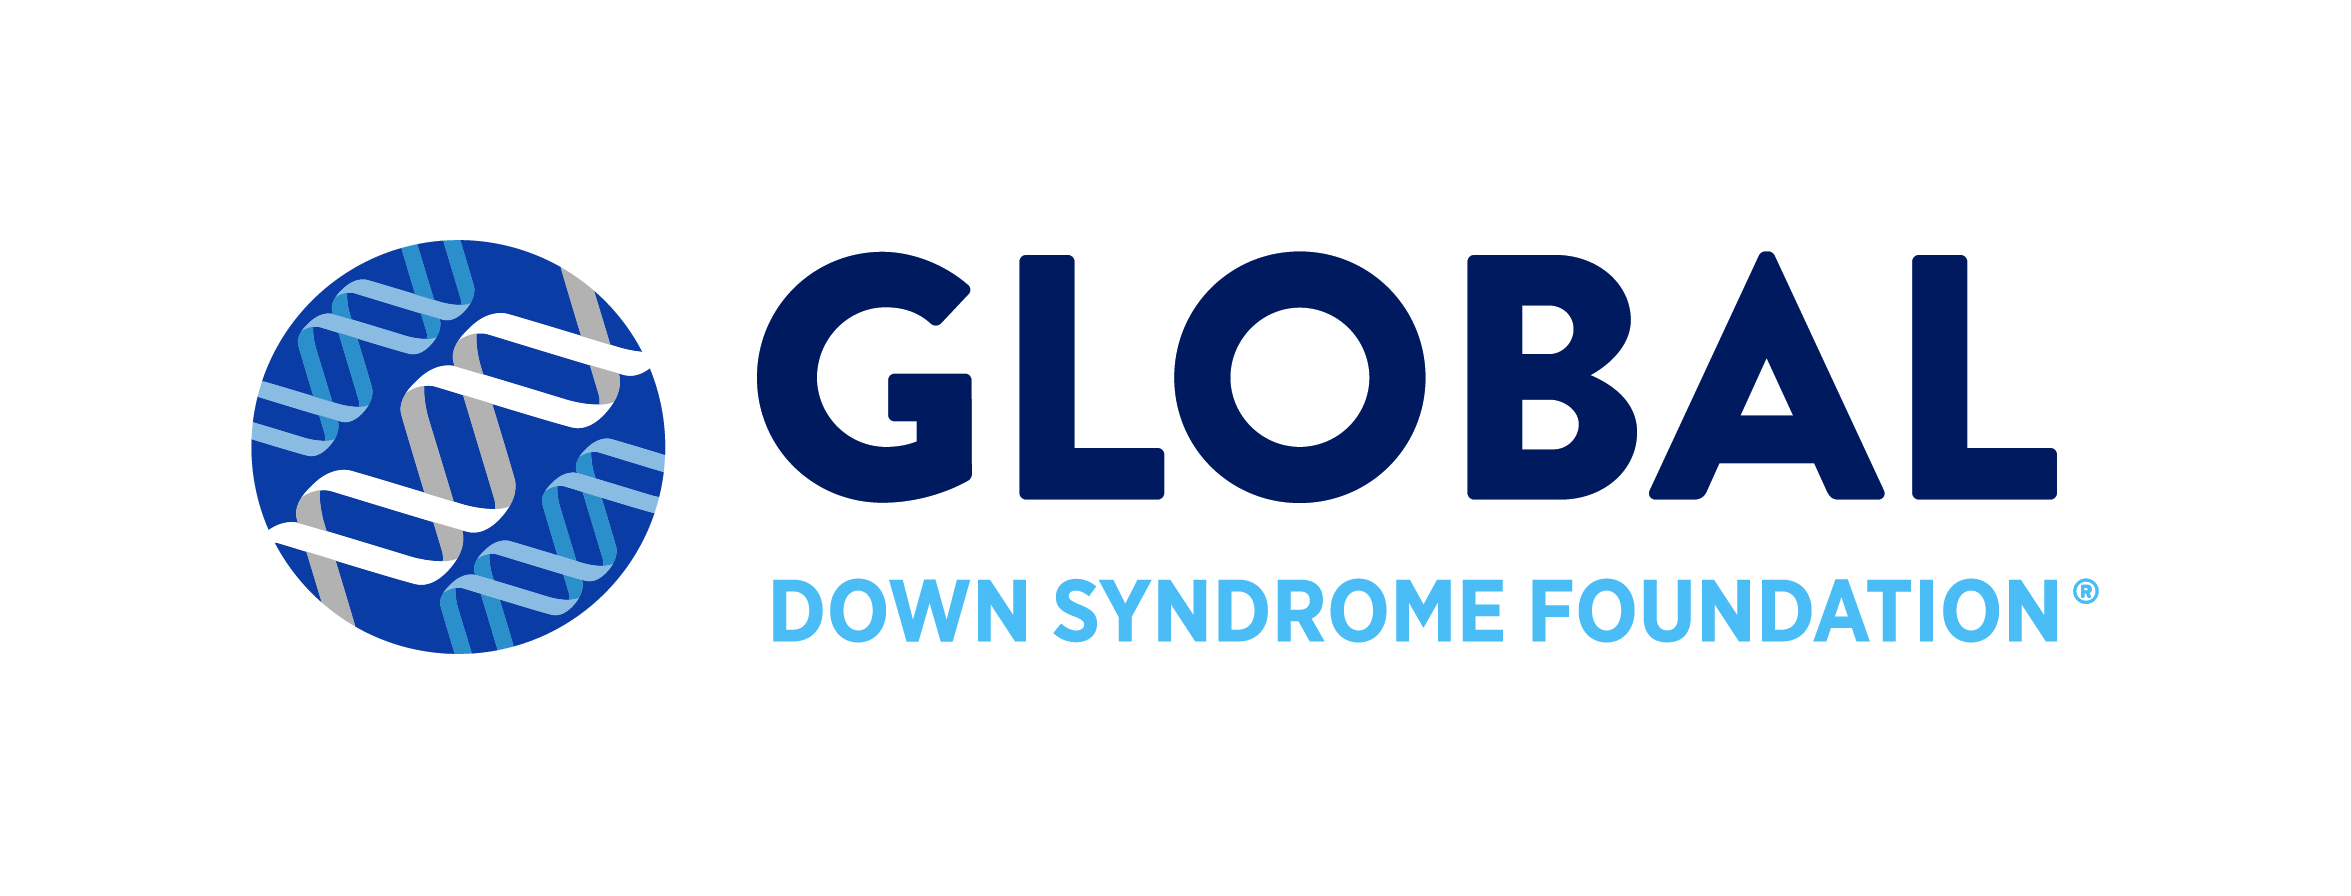 GLOBAL DOWN SYNDROME